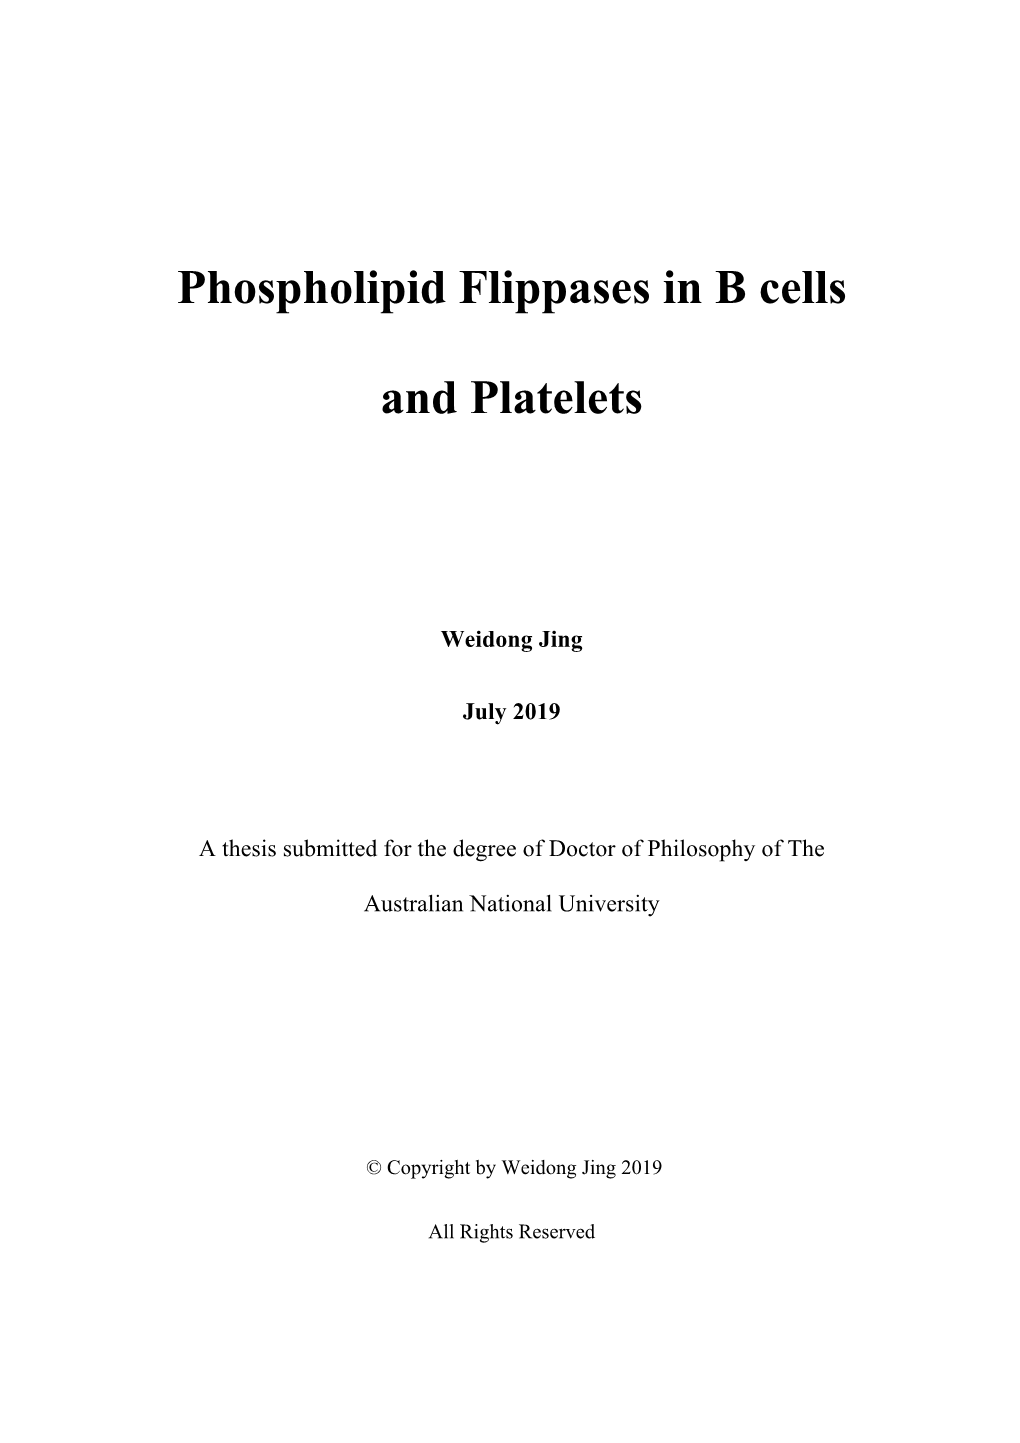 Phospholipid Flippases in B Cells and Platelets